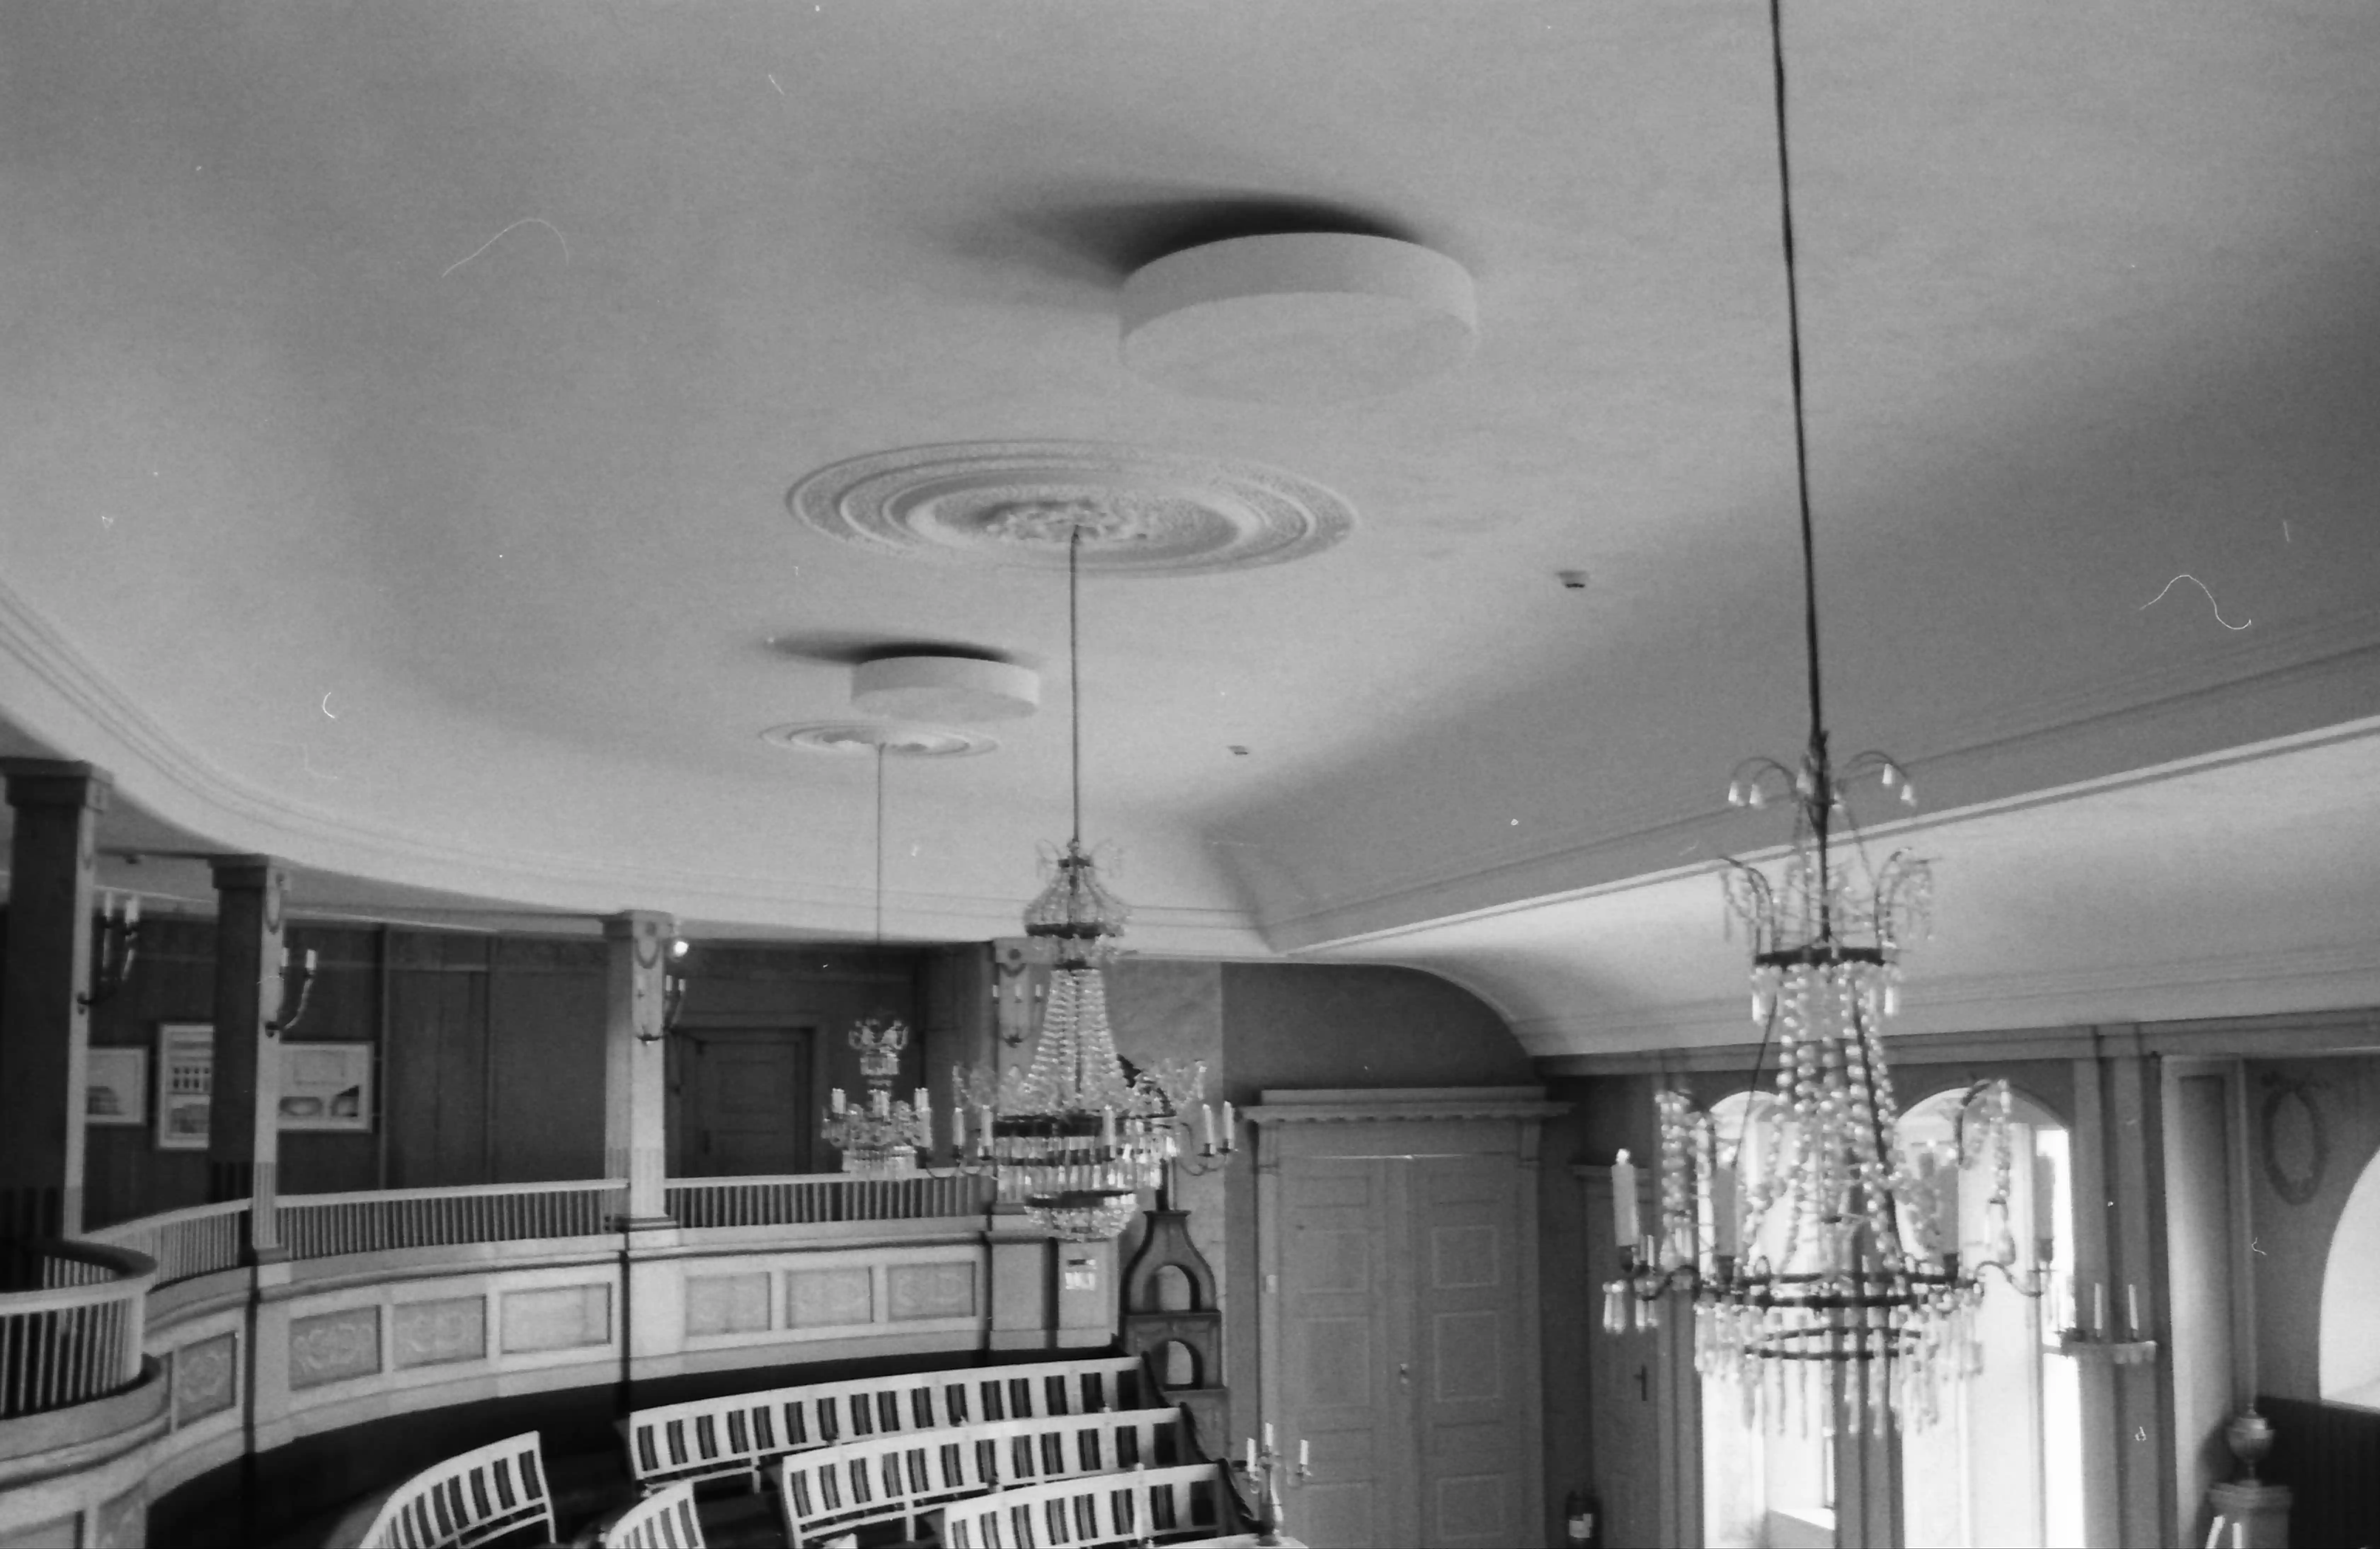 Black and white picture of a formal hall of some sort, focusing on its chandeliers